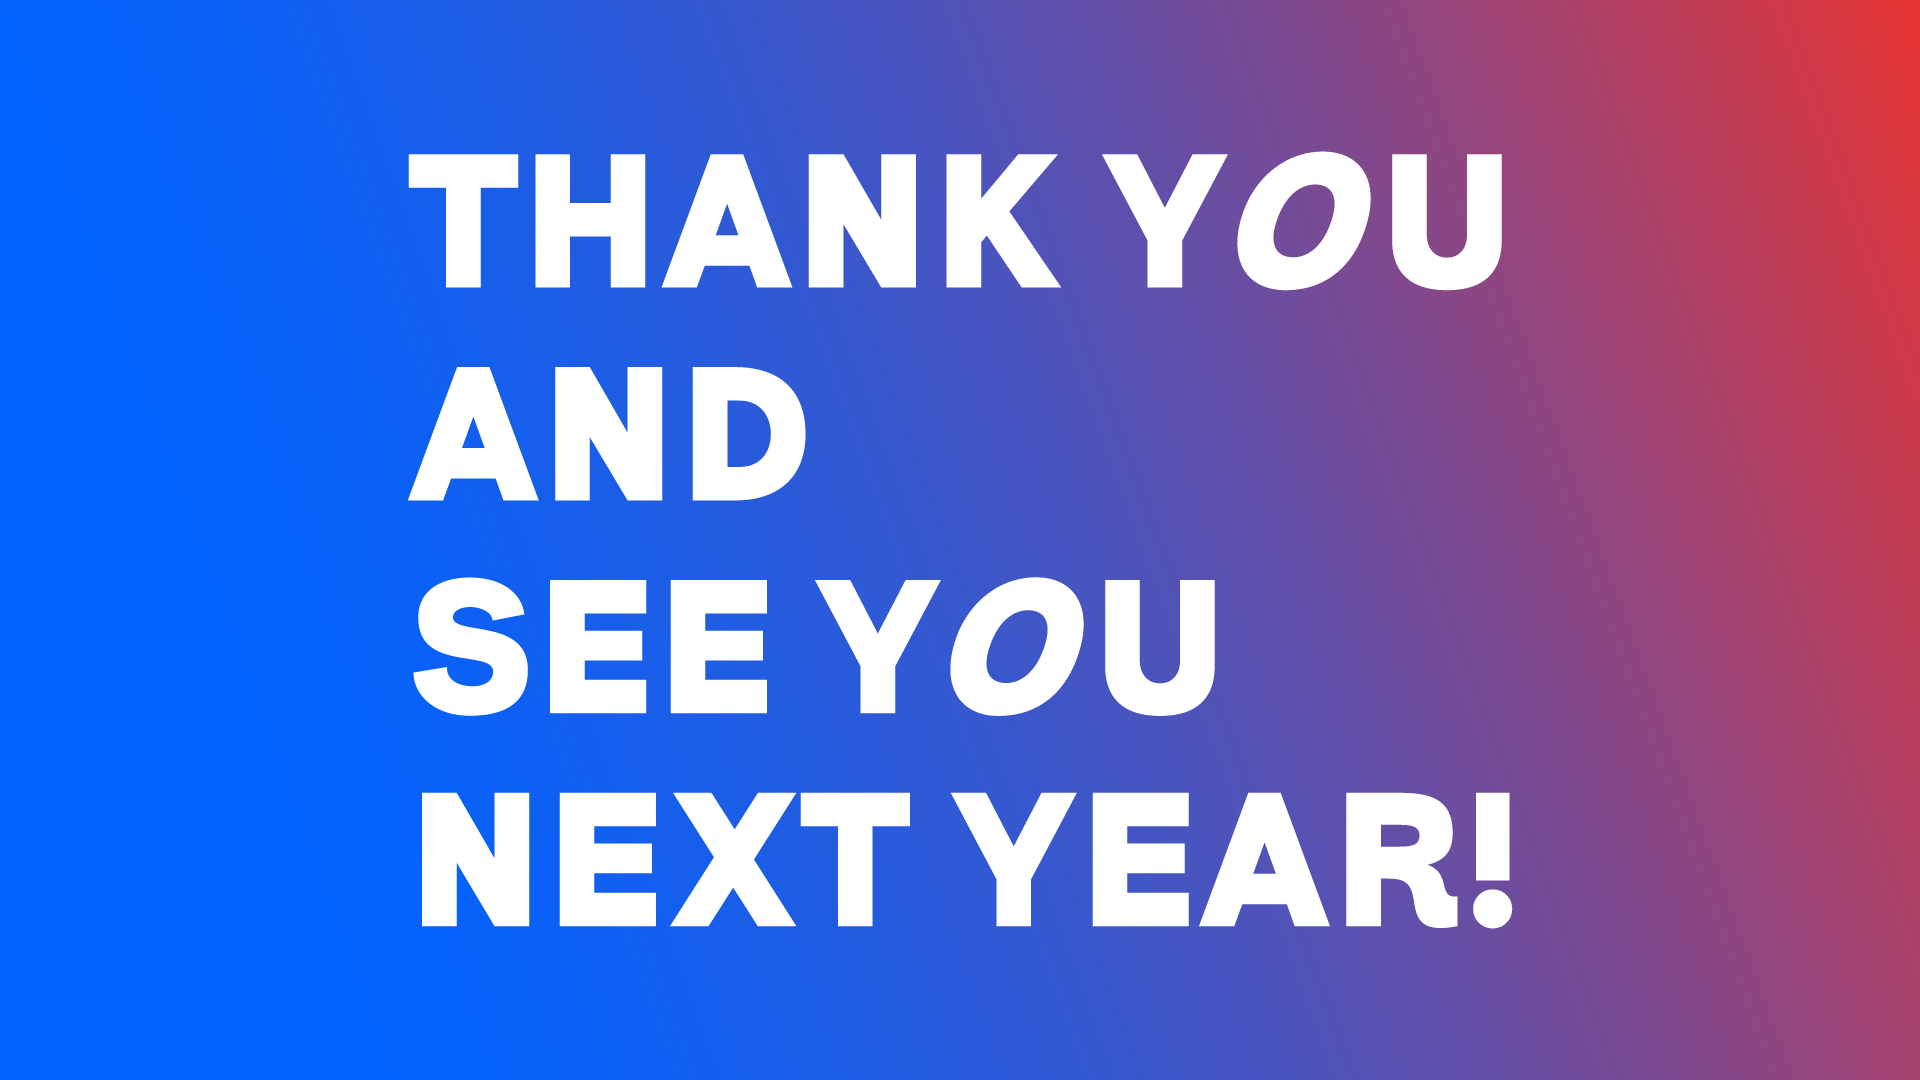 Thank you and see you next year!